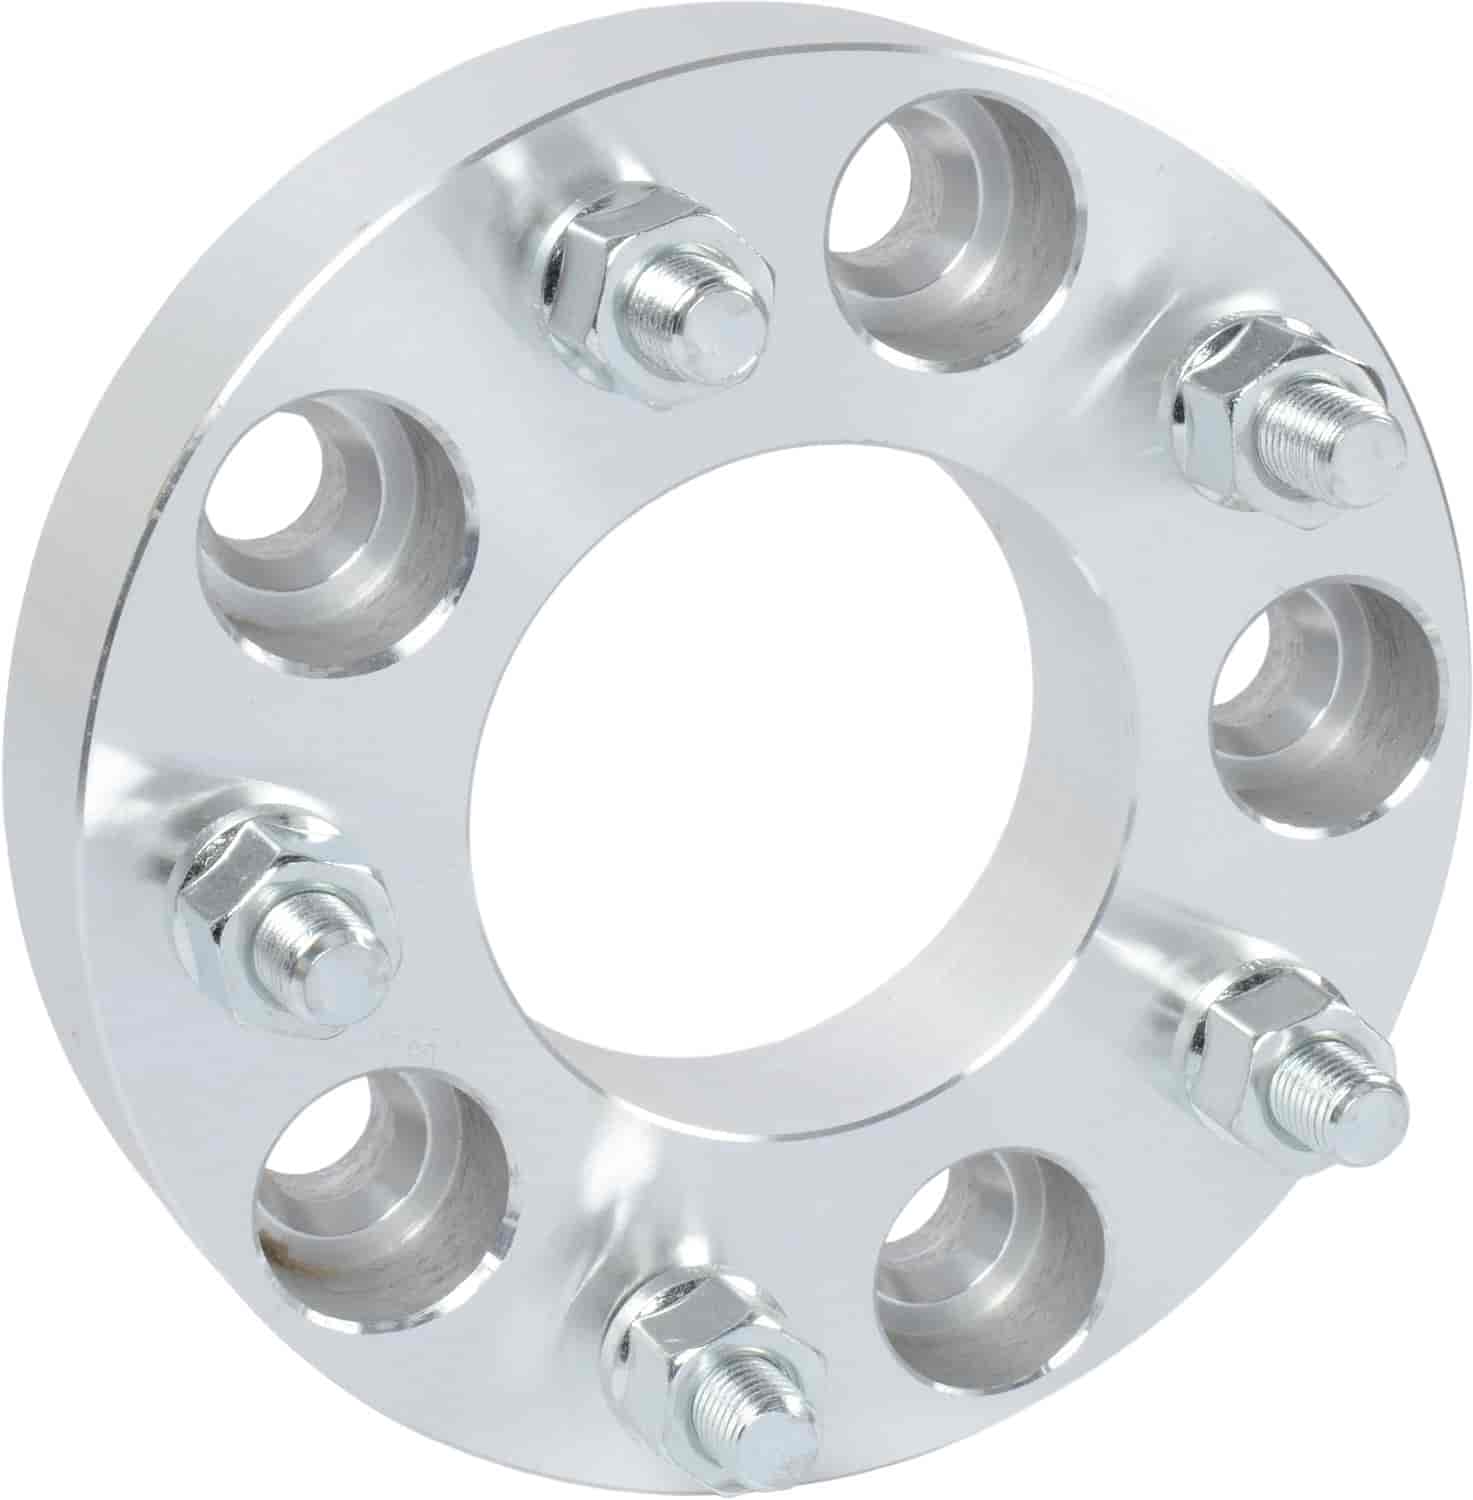 5-Lug Billet Aluminum Wheel Spacer [1.25 in. Thick] 5 x 5 in. Bolt Pattern